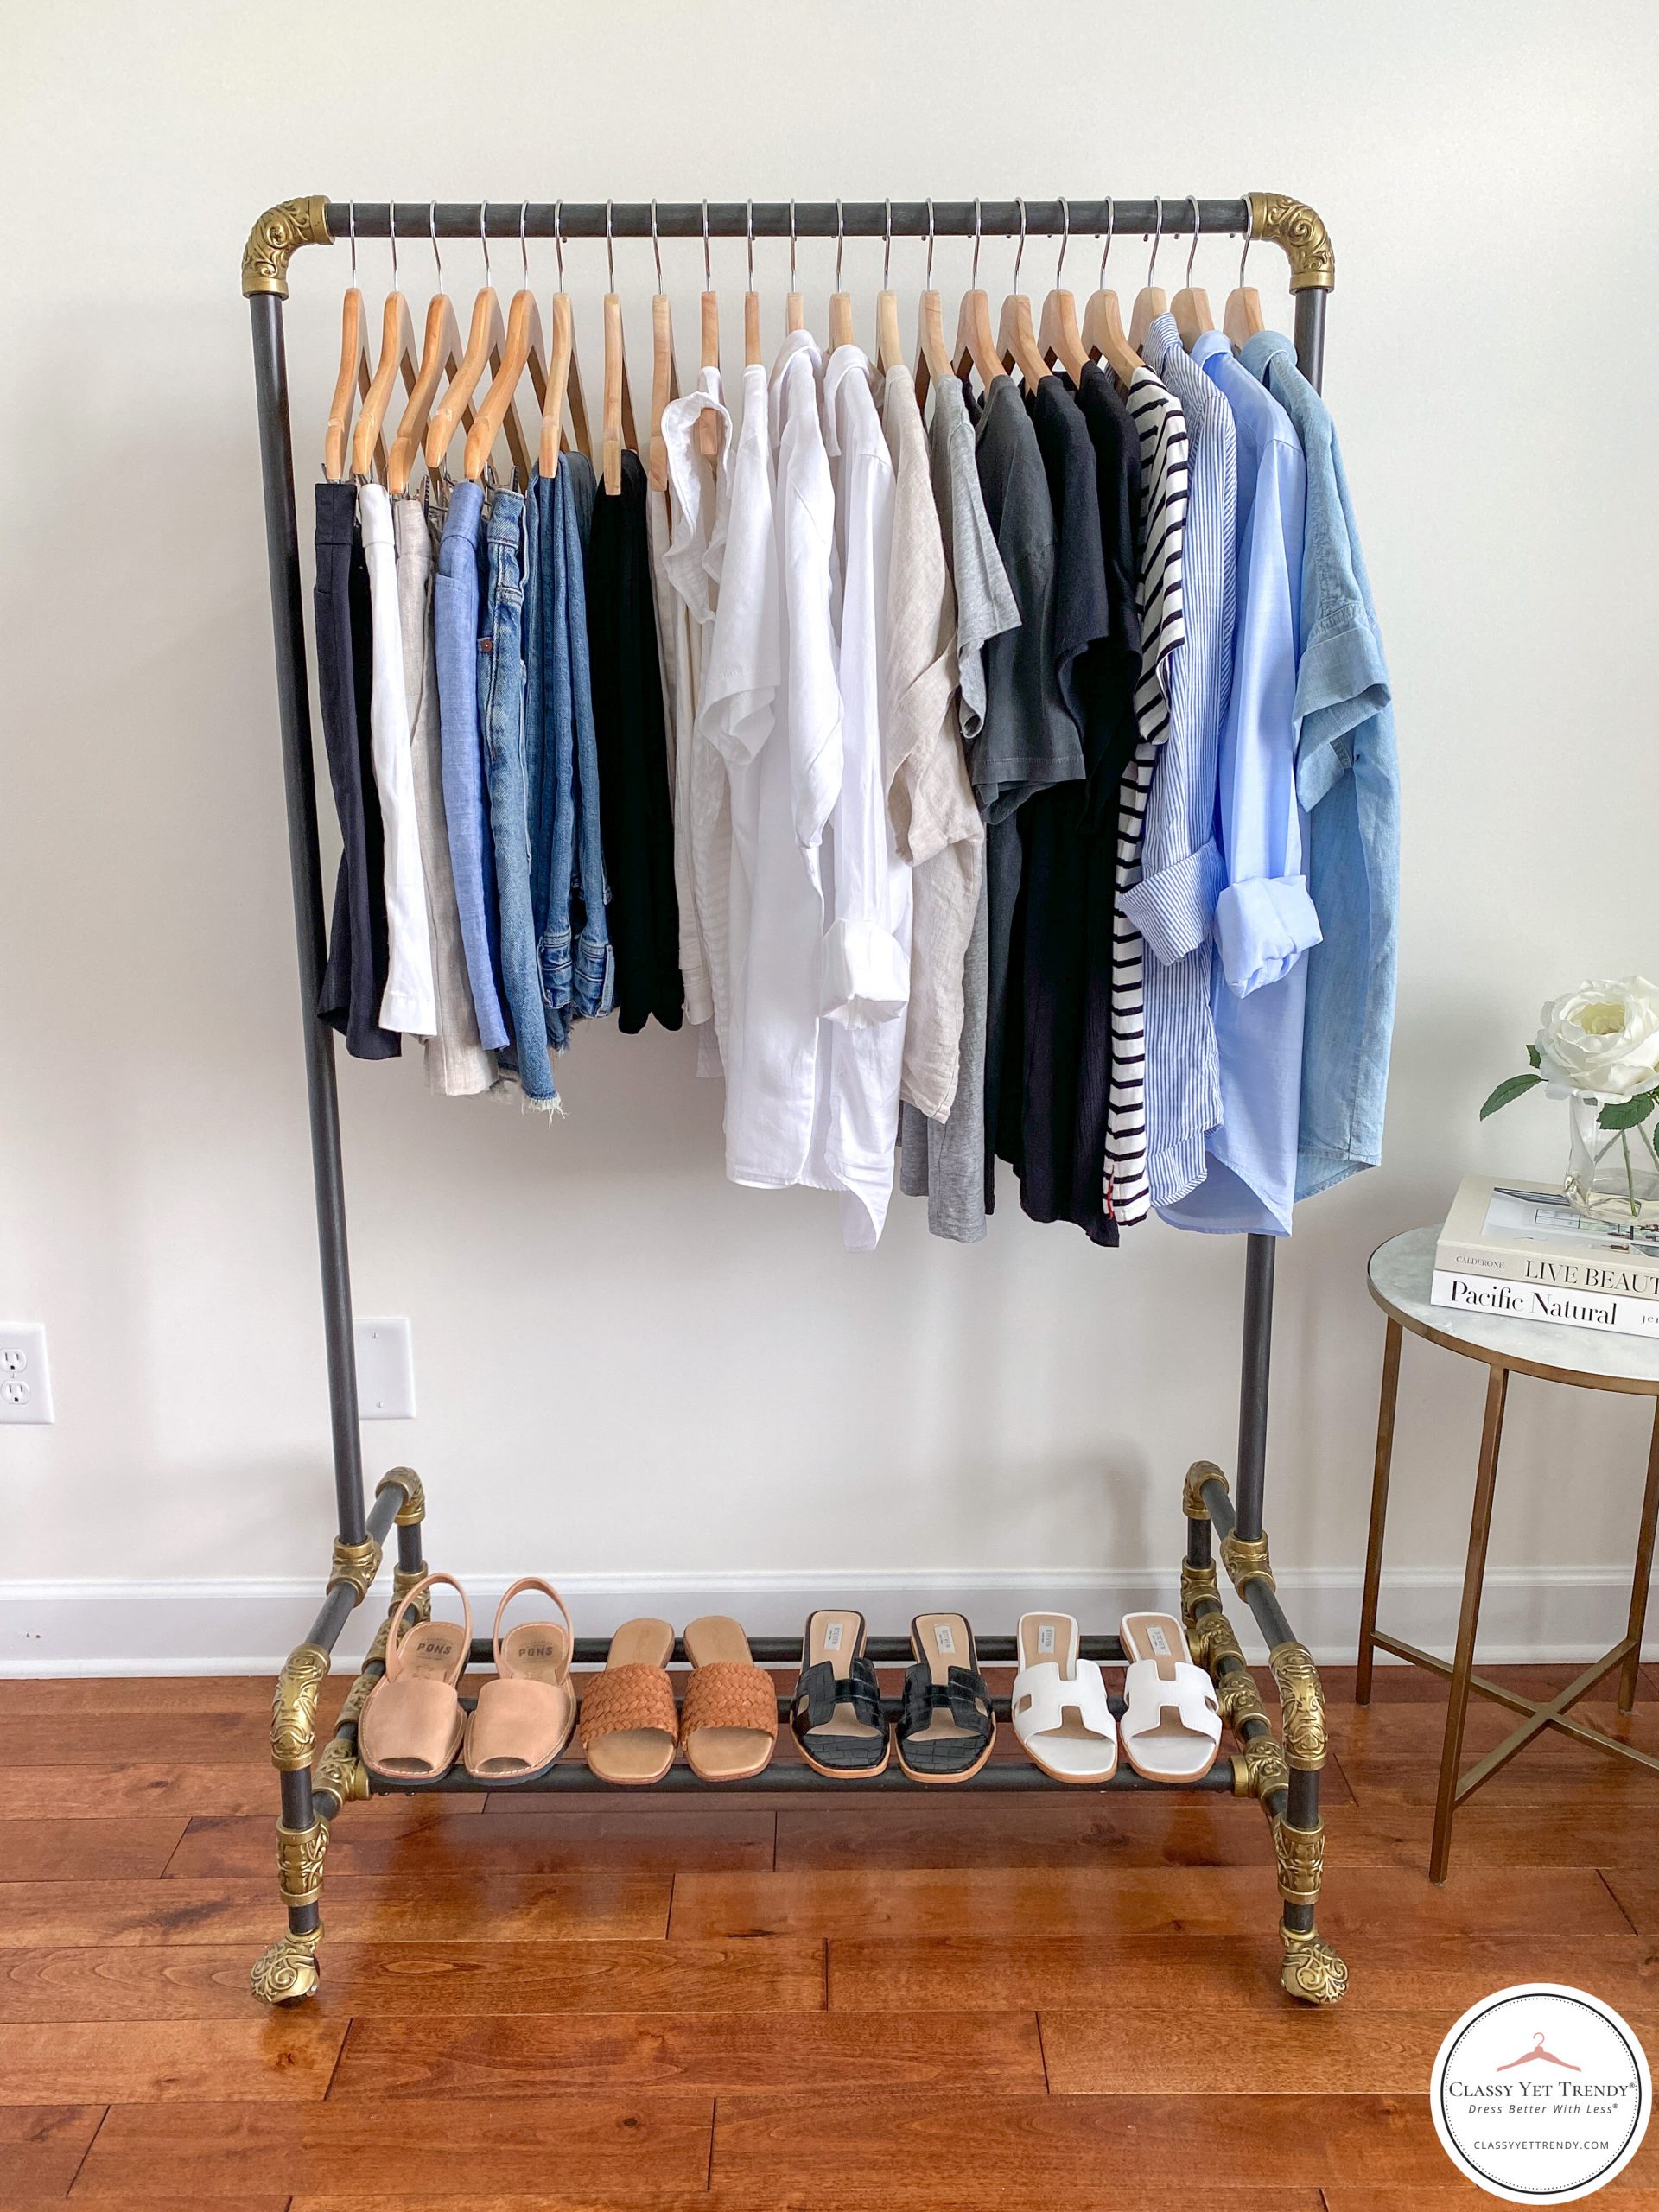 How to Add Color to a Neutral Wardrobe - Fashion Jackson